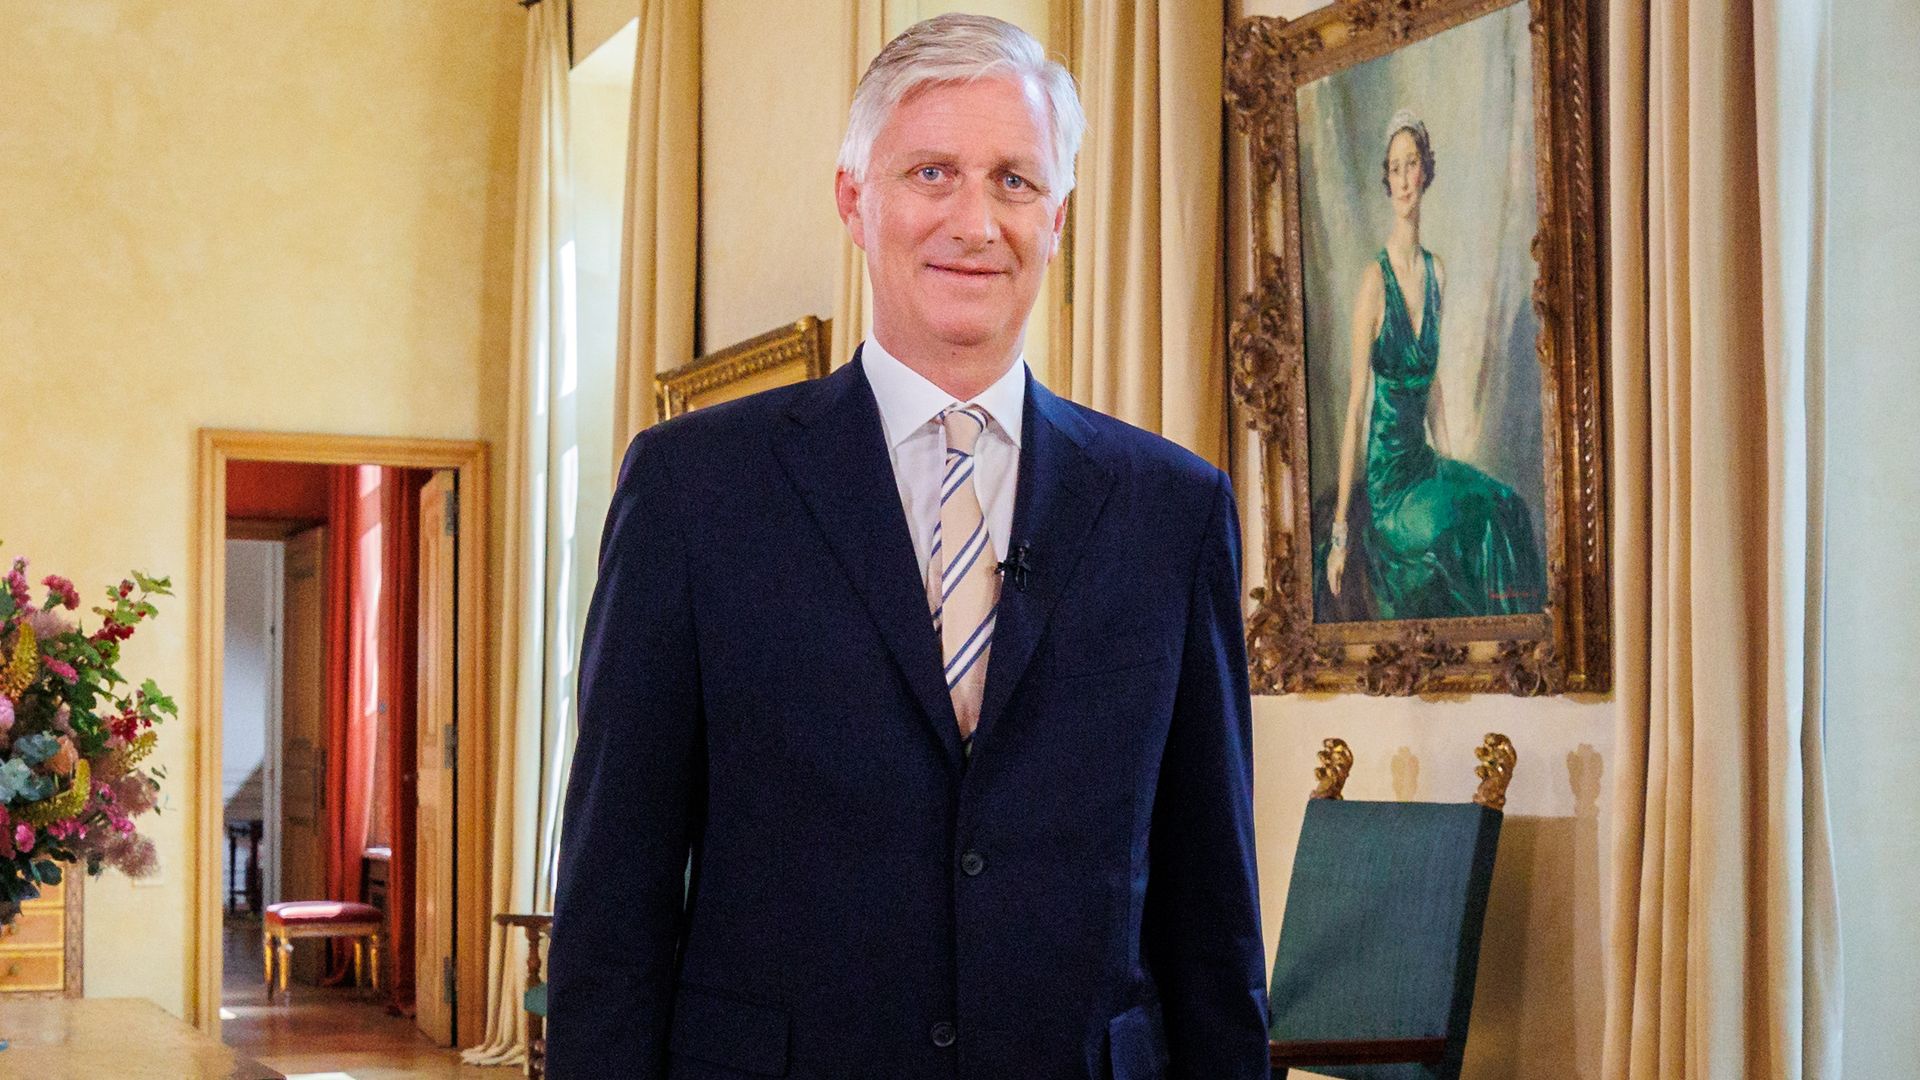 King Philippe of Belgium stood in a palace room